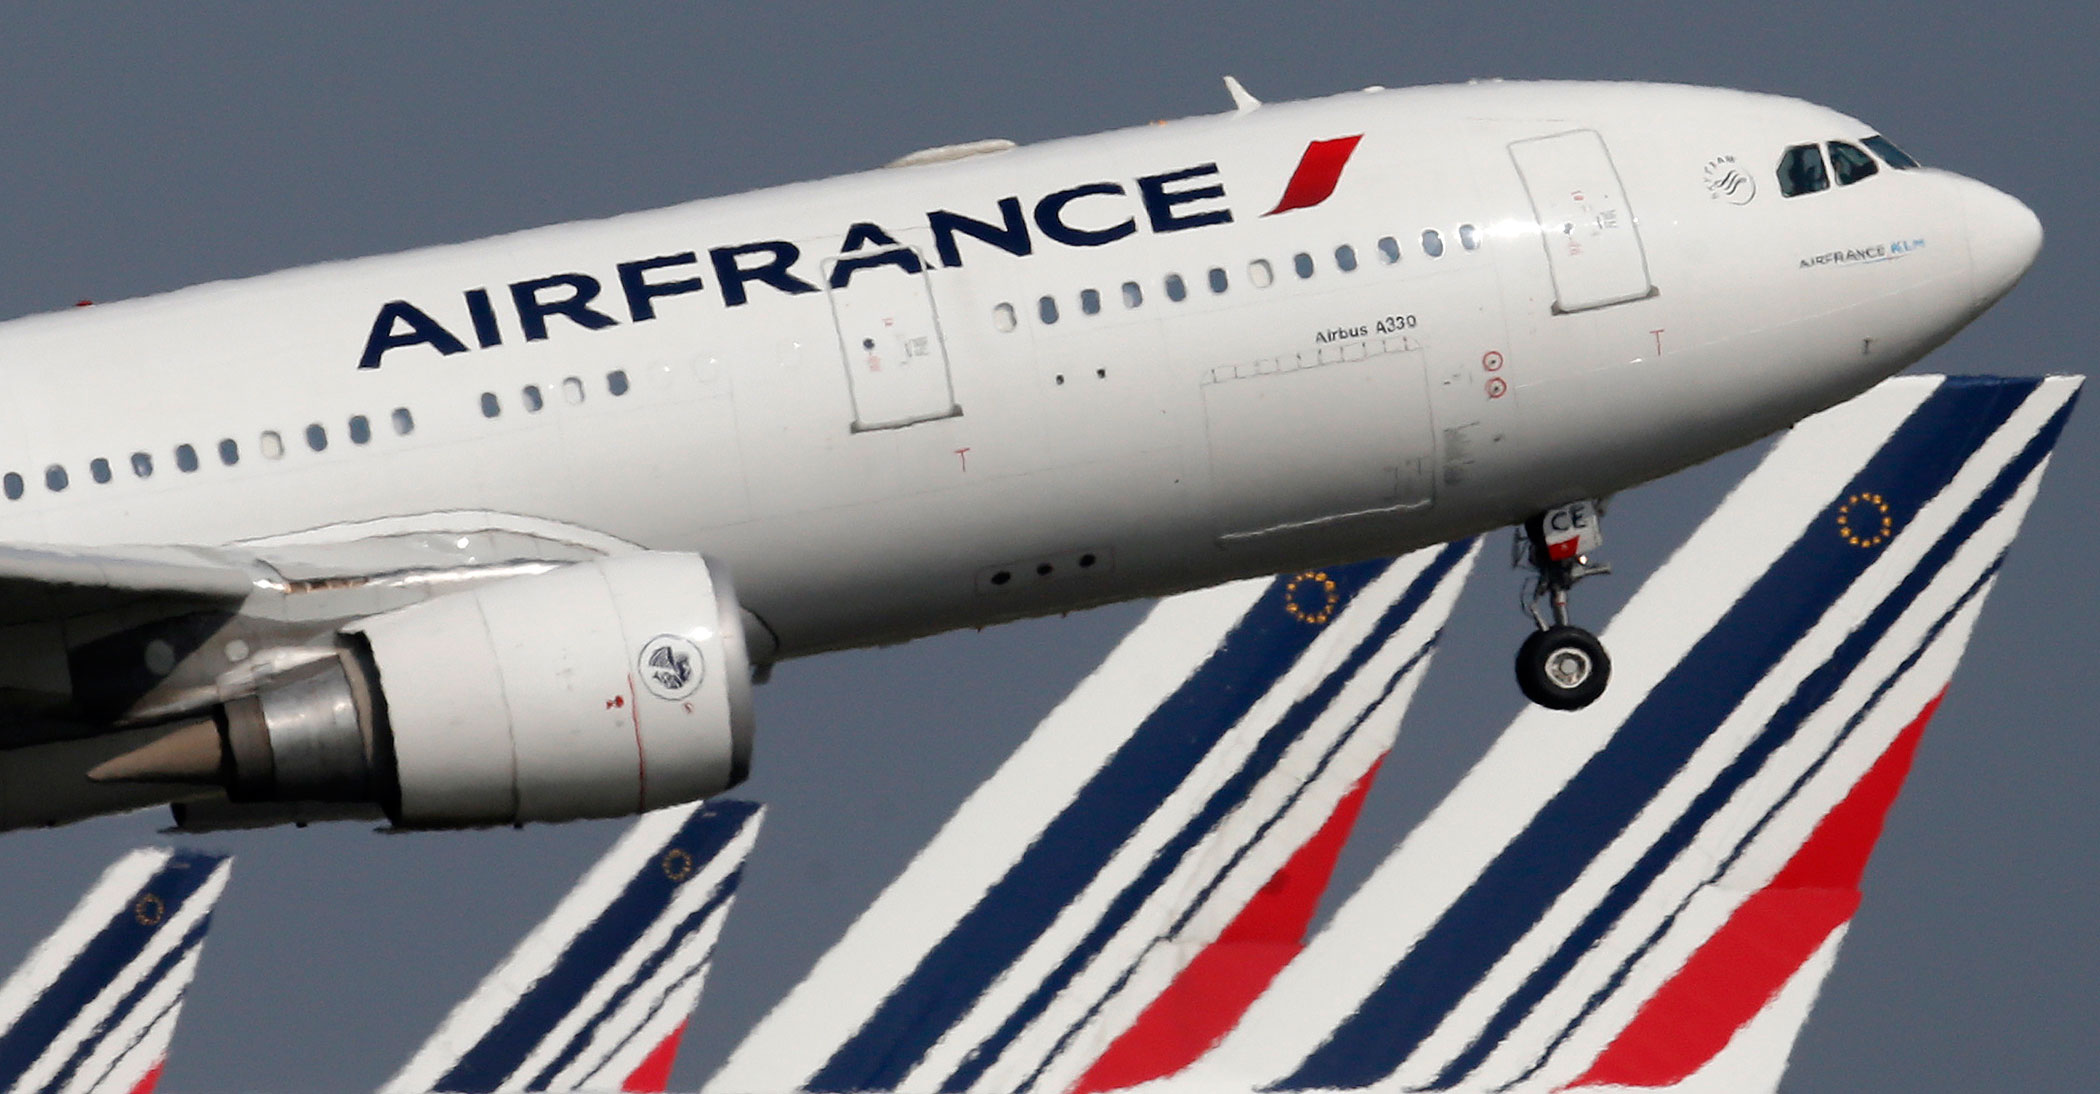 An Air France Airbus A330 aircraft takes off at Charles-de-Gaulle airport